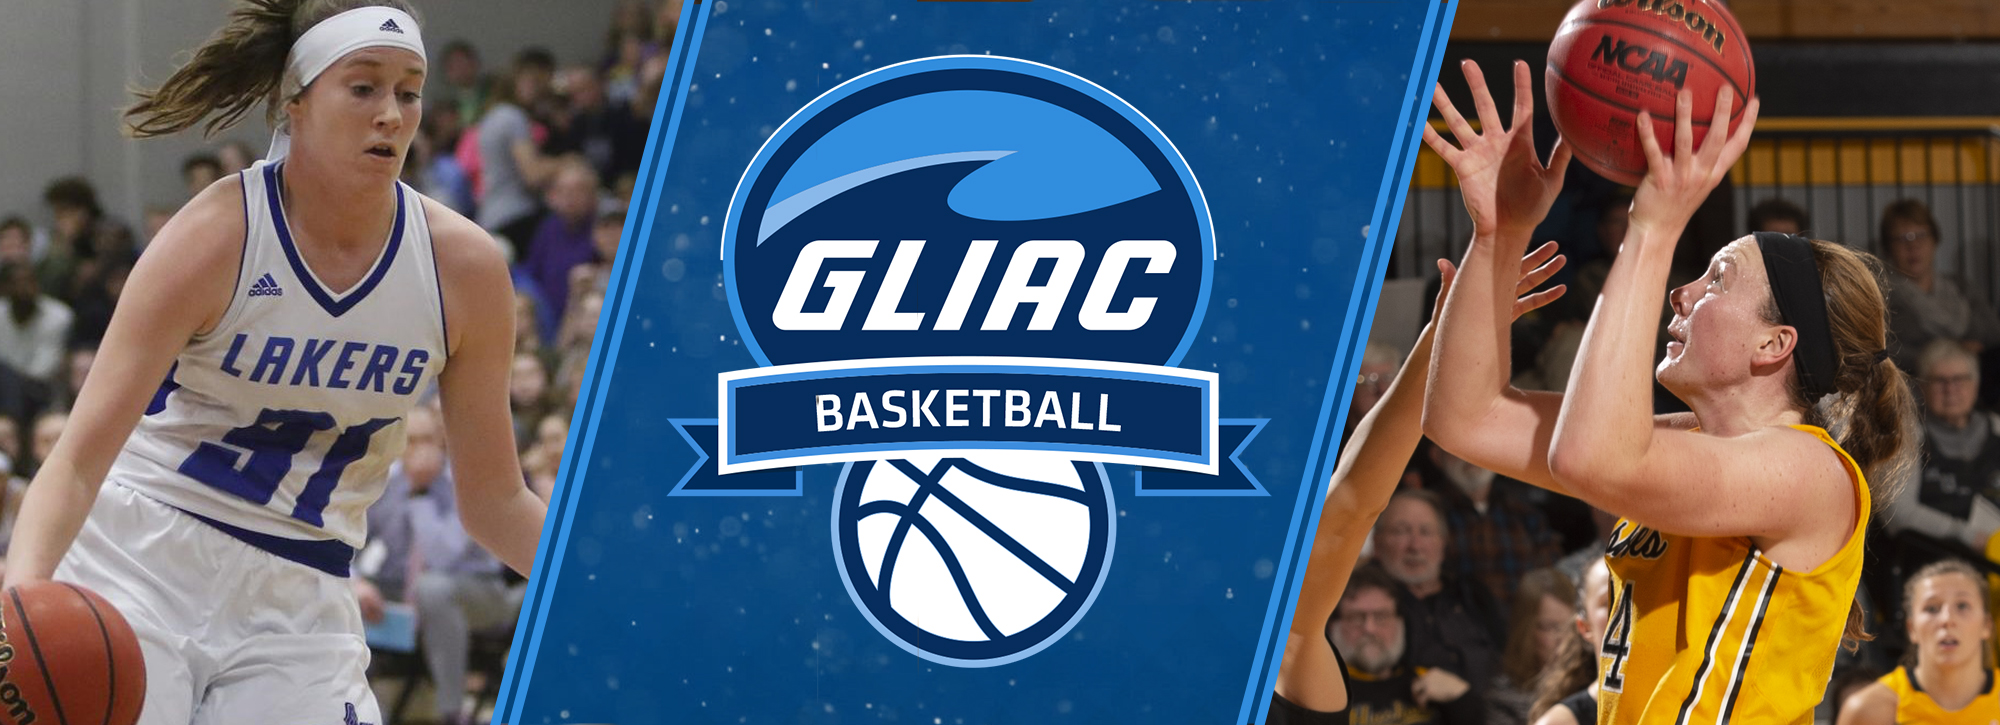 MTU's Kelliher and GVSU's Boensch are named women's basketball players of the week for Week 12